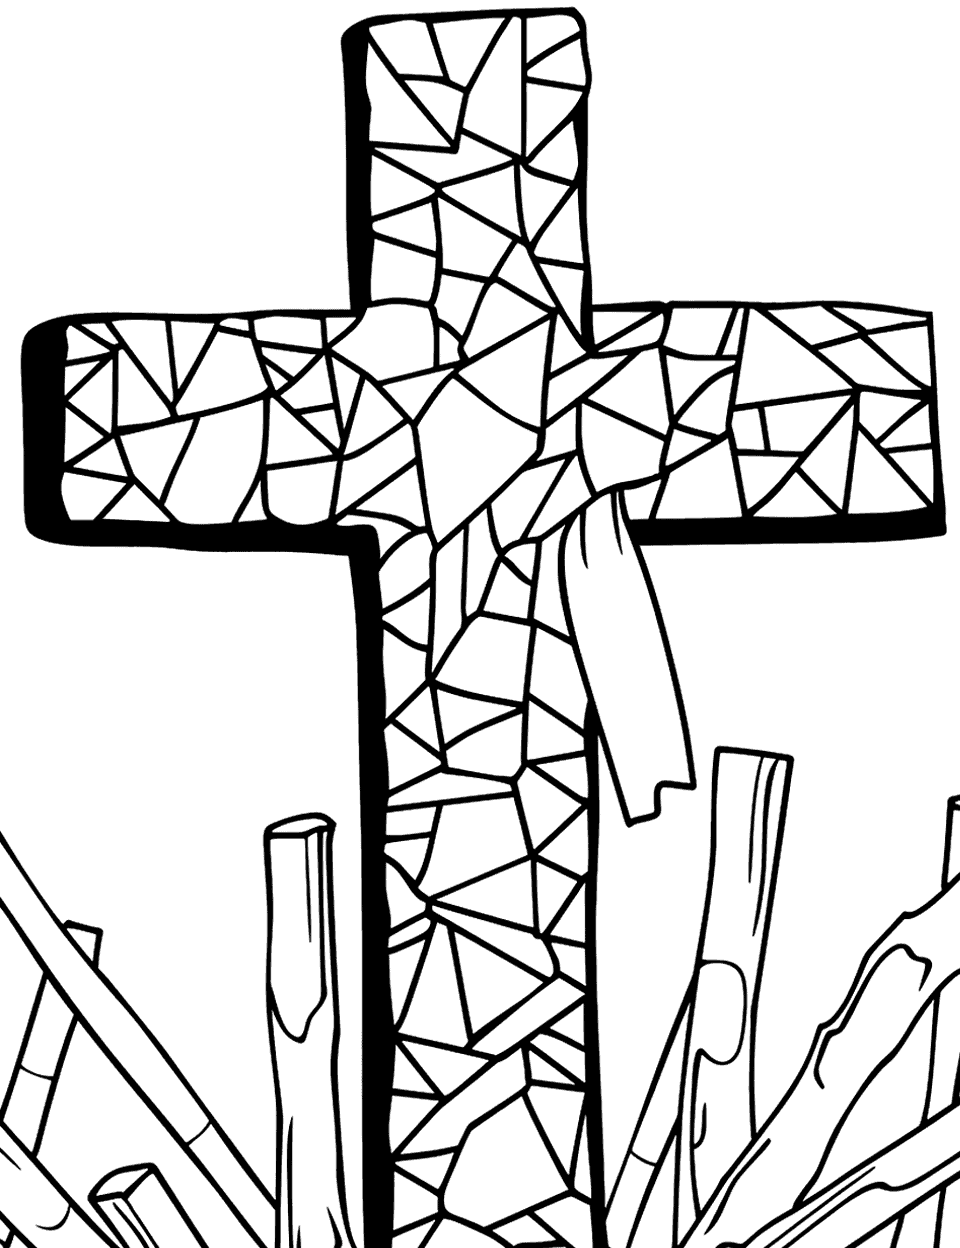 Stained Glass Cross Coloring Page - A cross resembling a stained glass window surrounded by wood at its base.